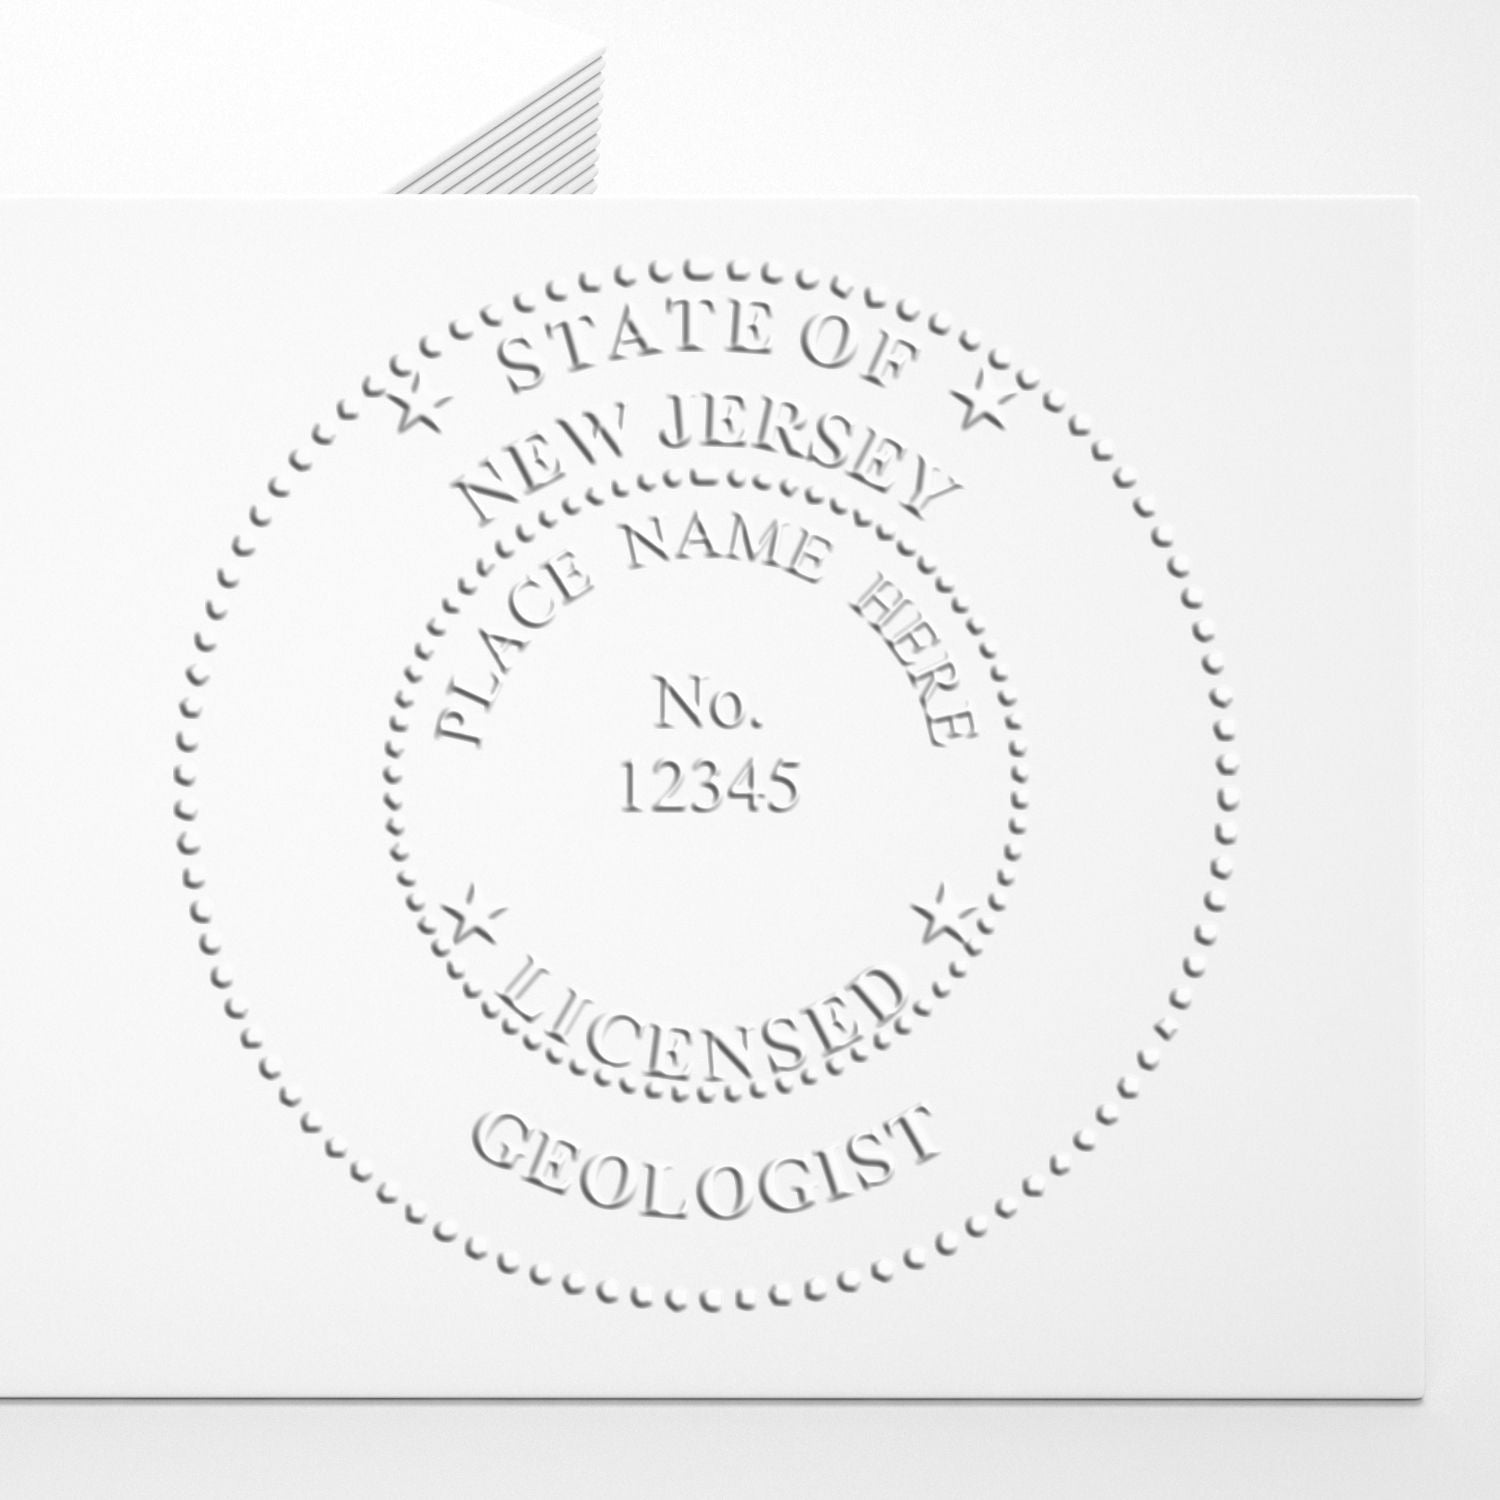 An in use photo of the Long Reach New Jersey Geology Seal showing a sample imprint on a cardstock